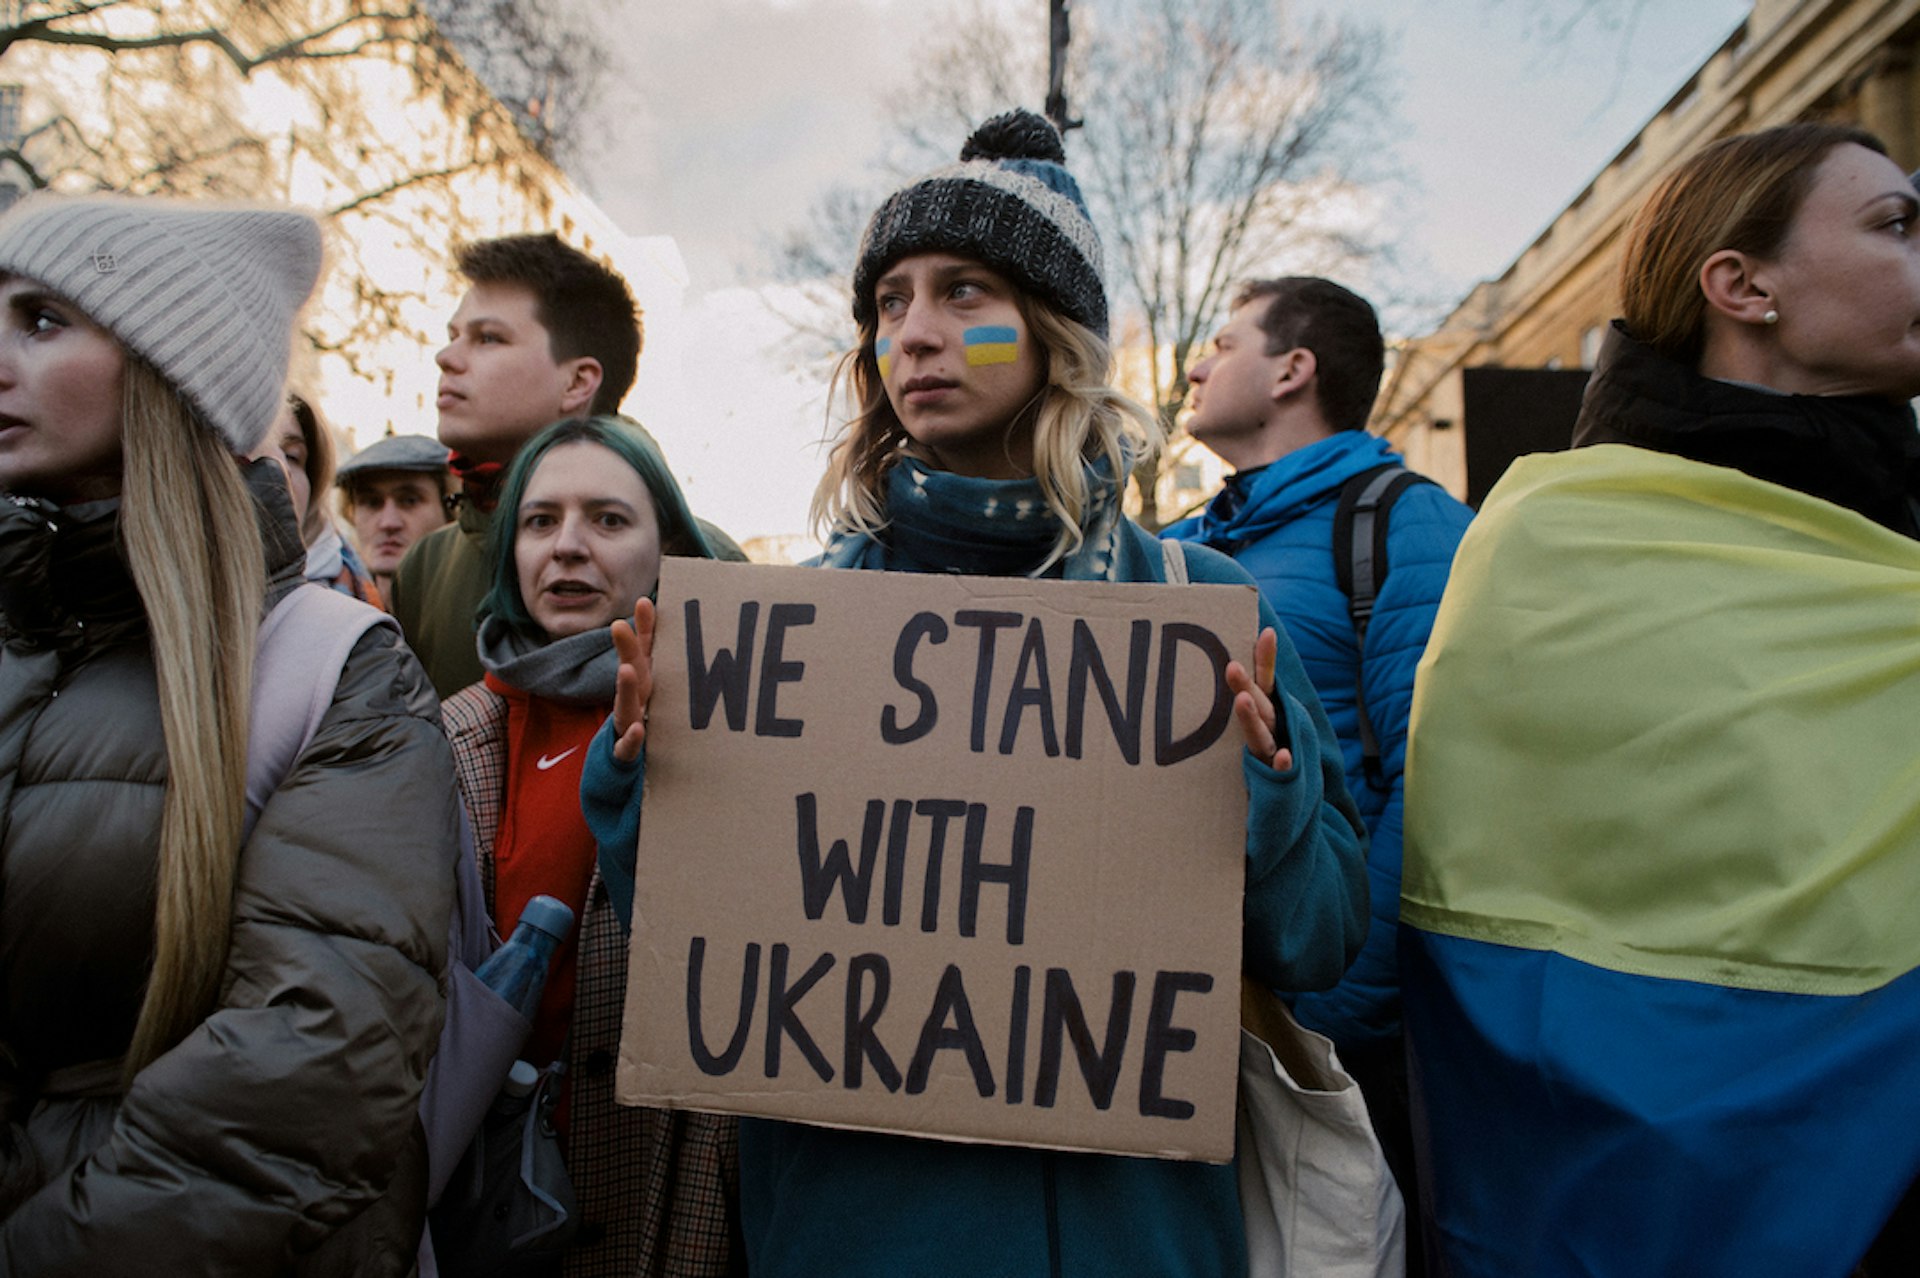 Protestors rally in Whitehall in support of Ukraine